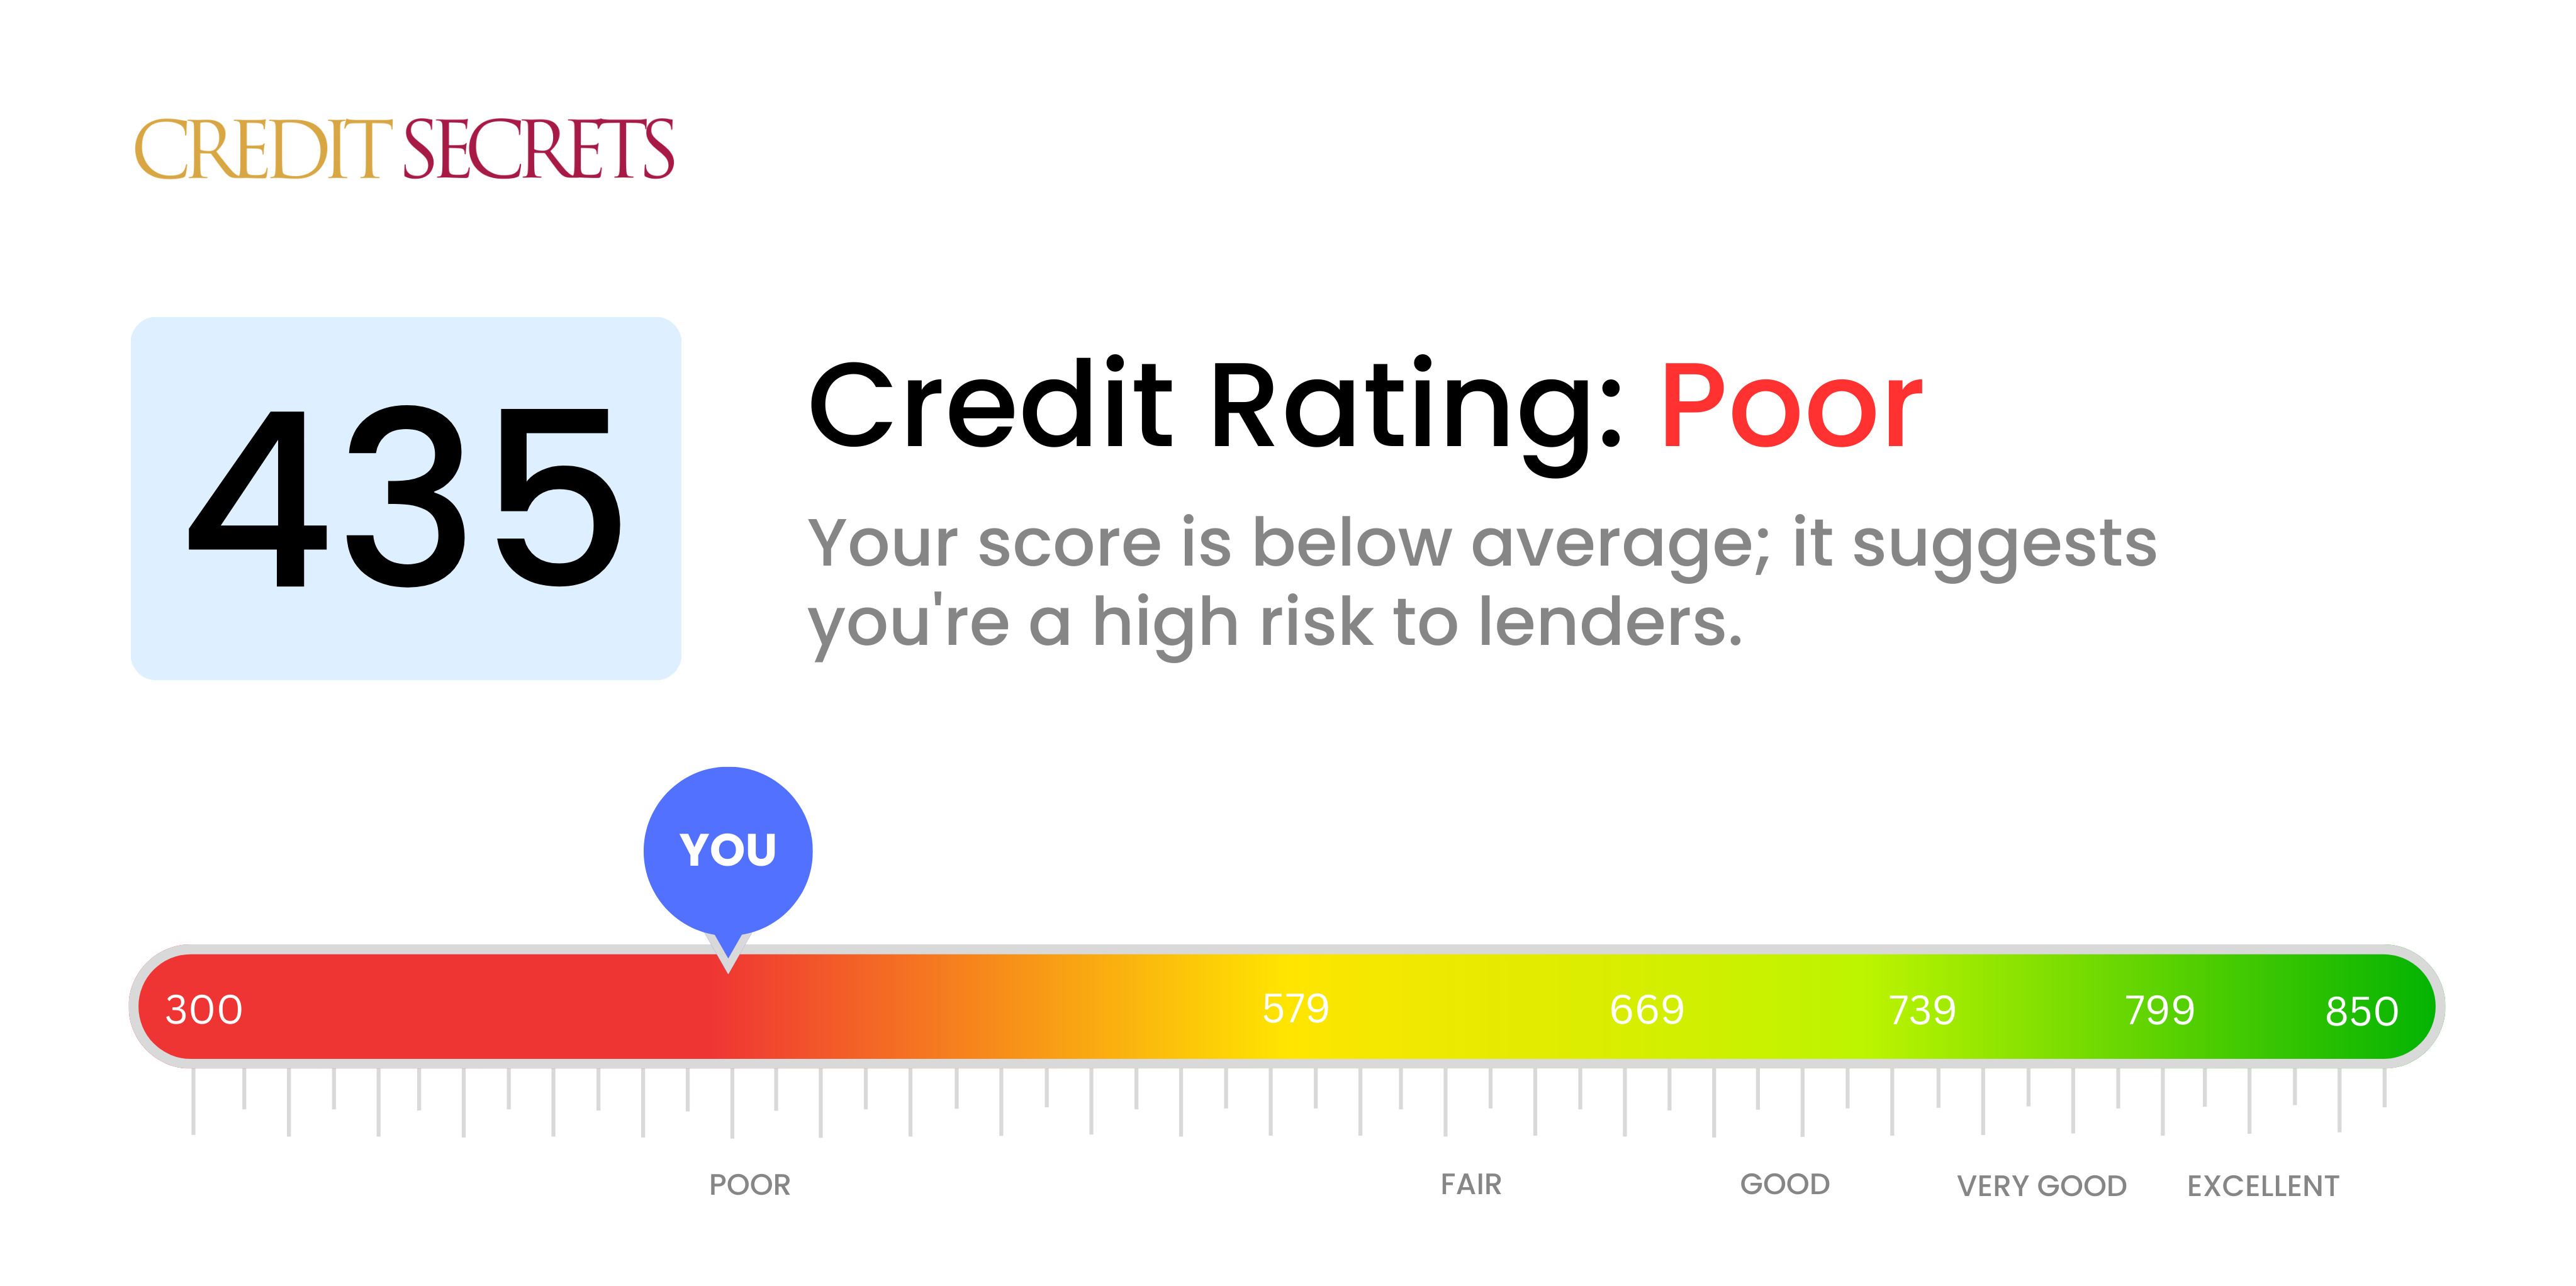 Is 435 a good credit score?